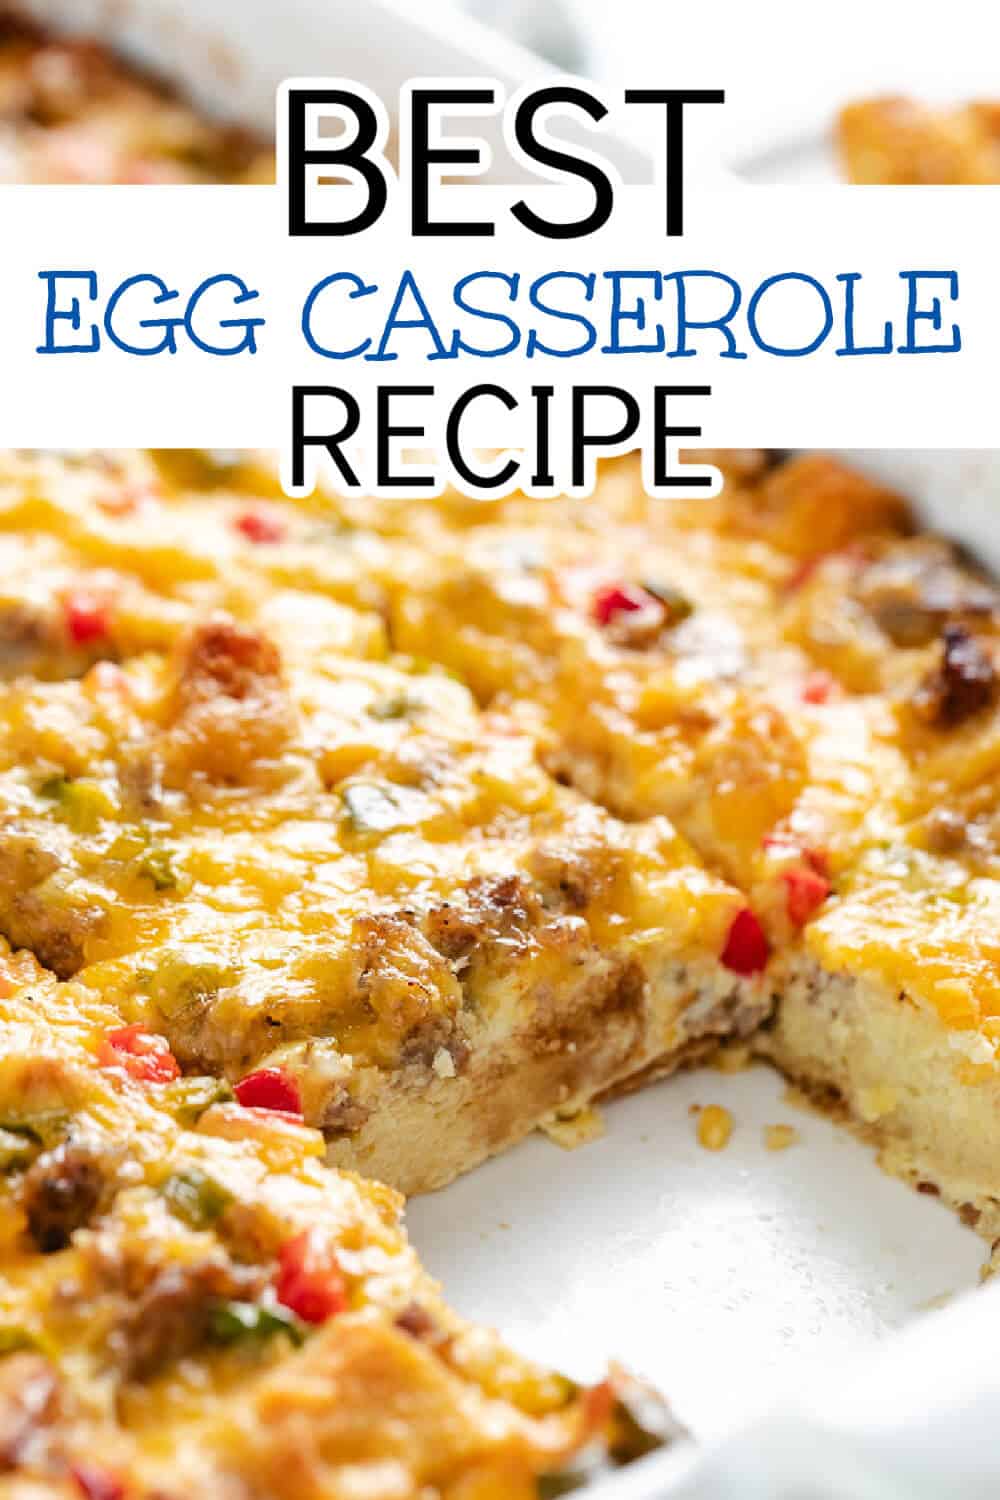 White dish filled with breakfast casserole with sausage.